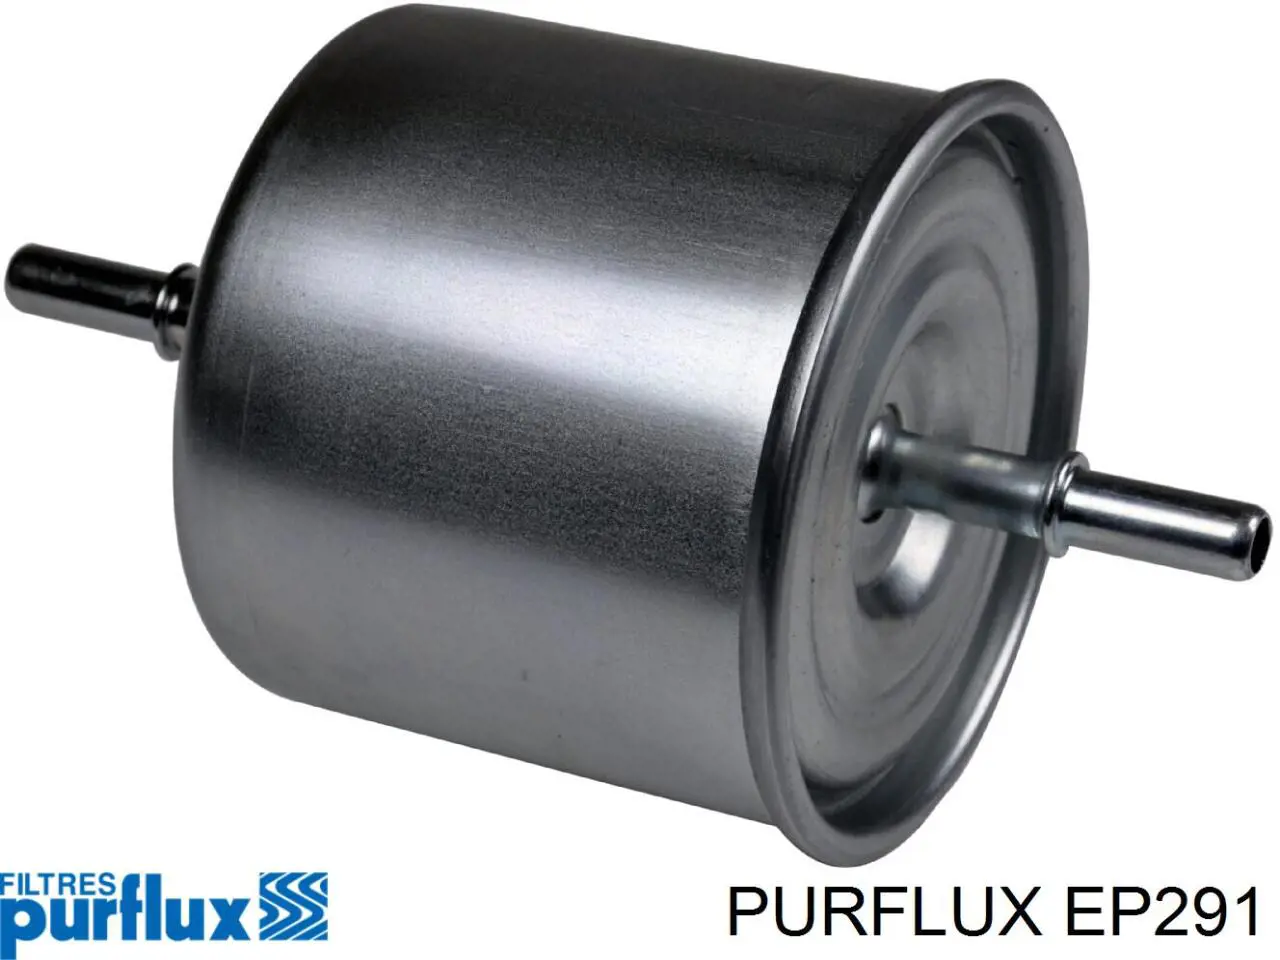 Filtro combustible EP291 Purflux